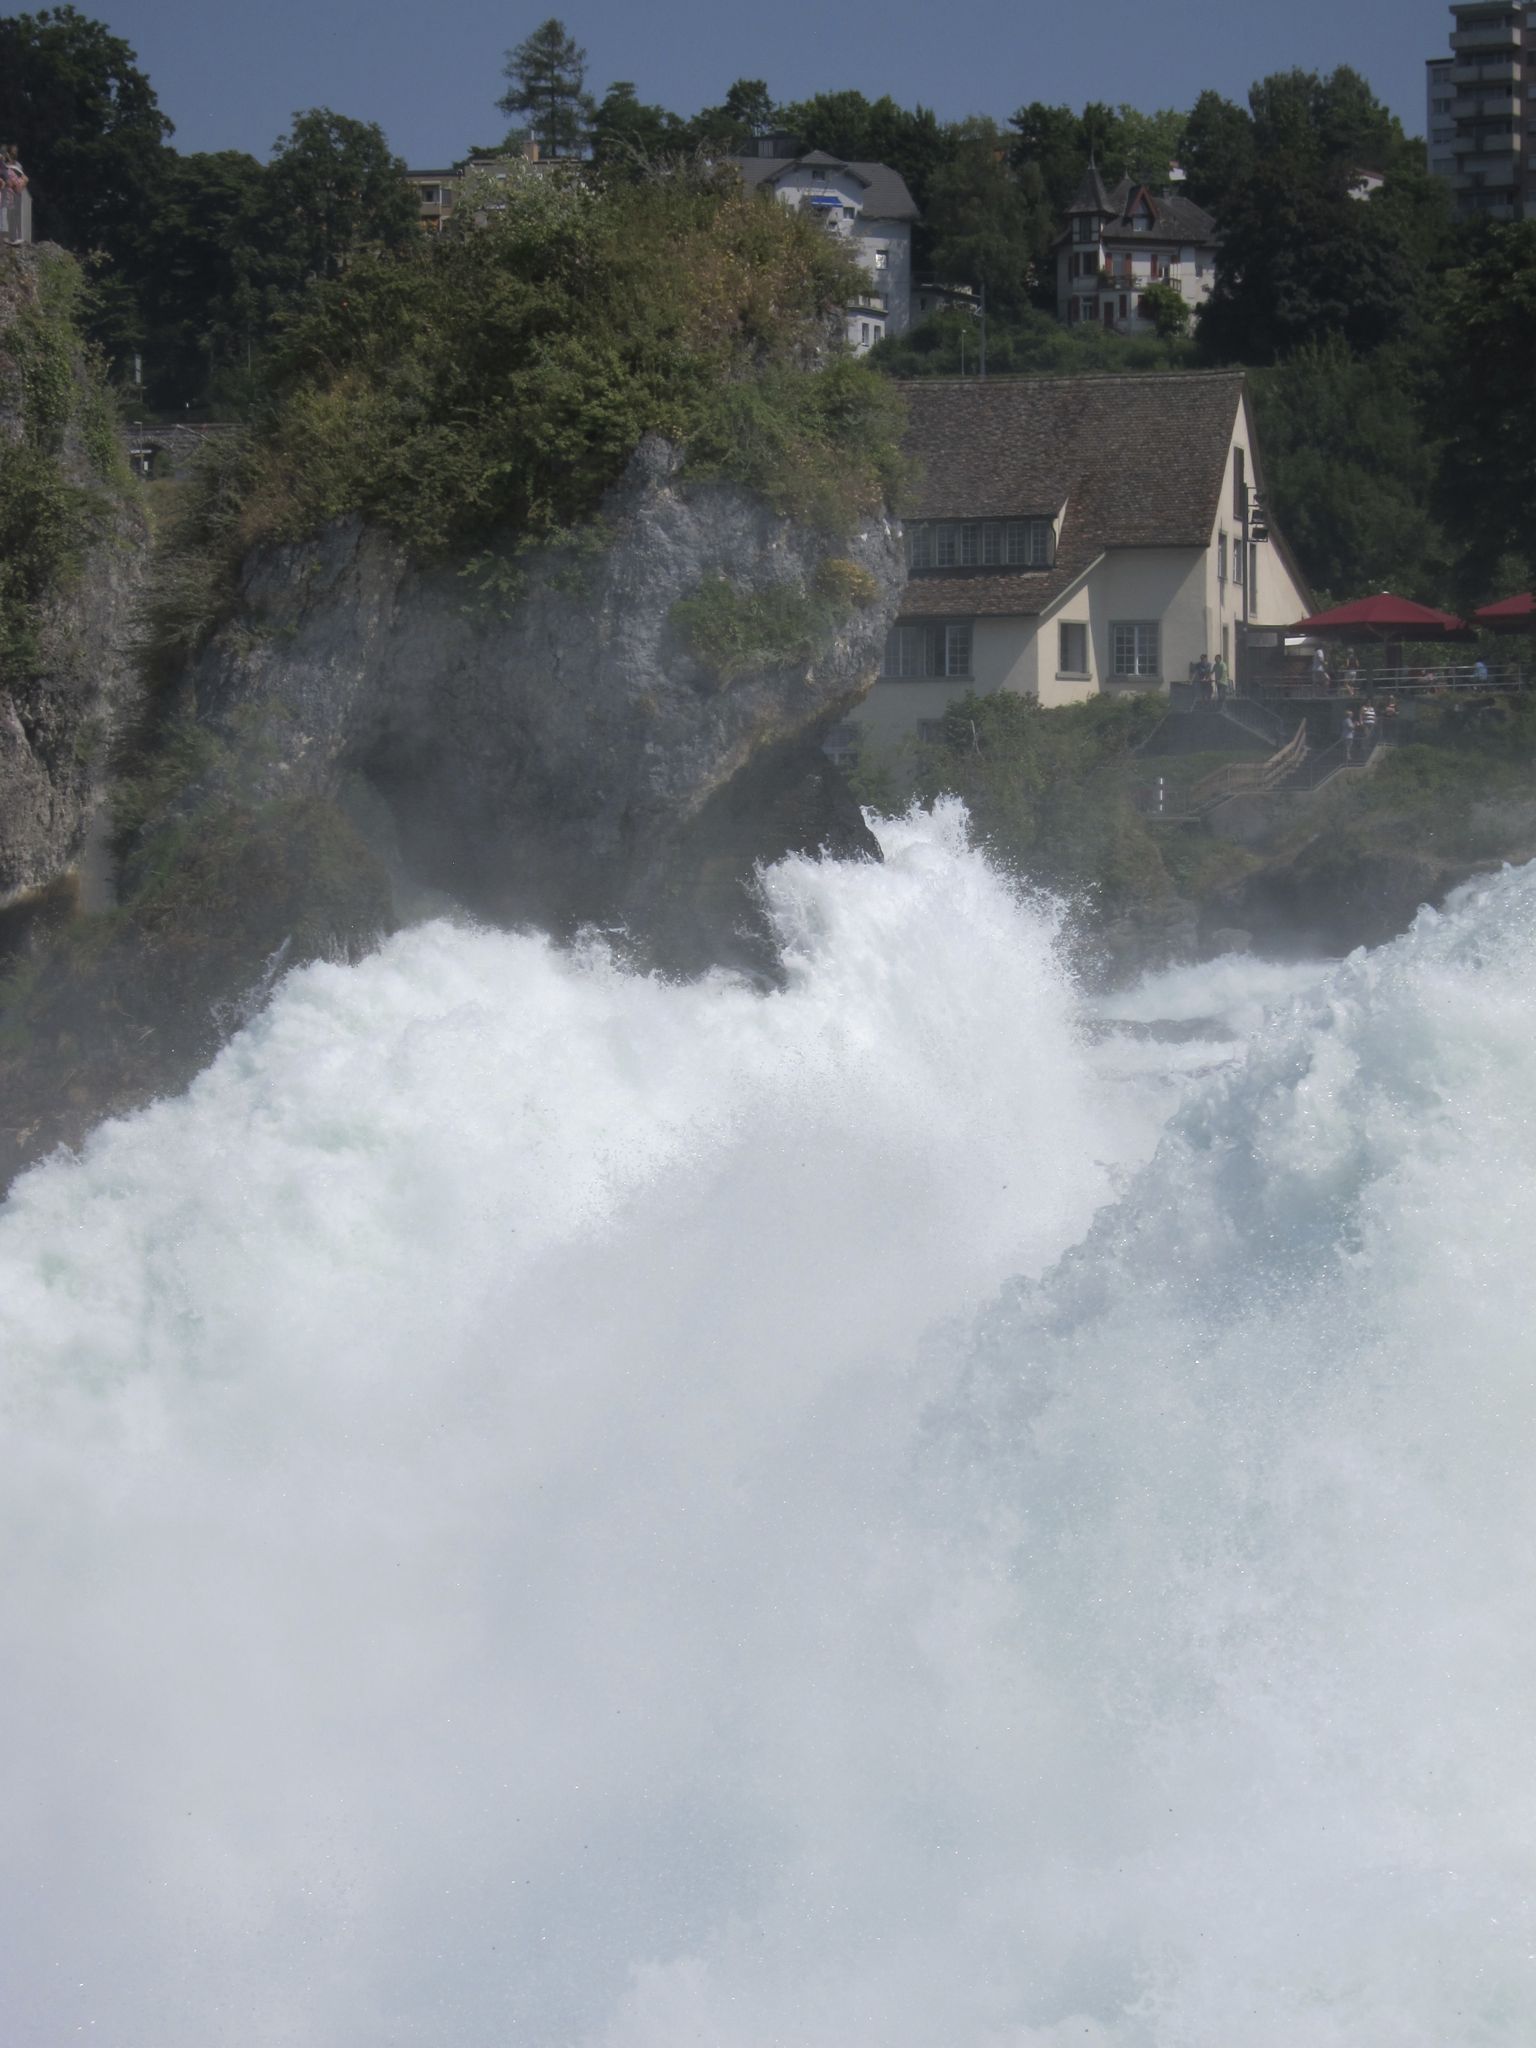 Photo 5 of 22 from the album Rheinfall.